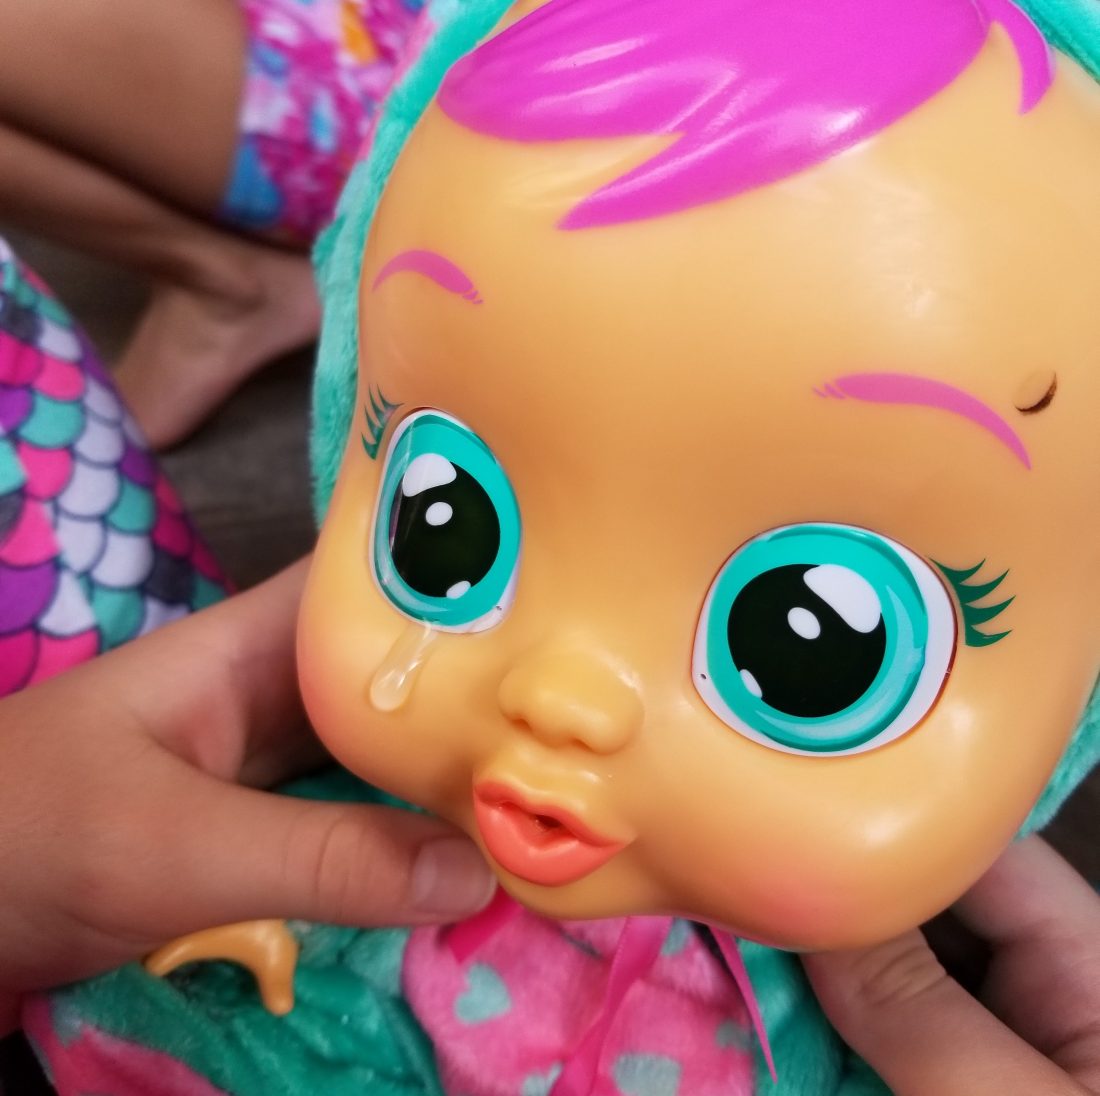 baby doll that cries real tears